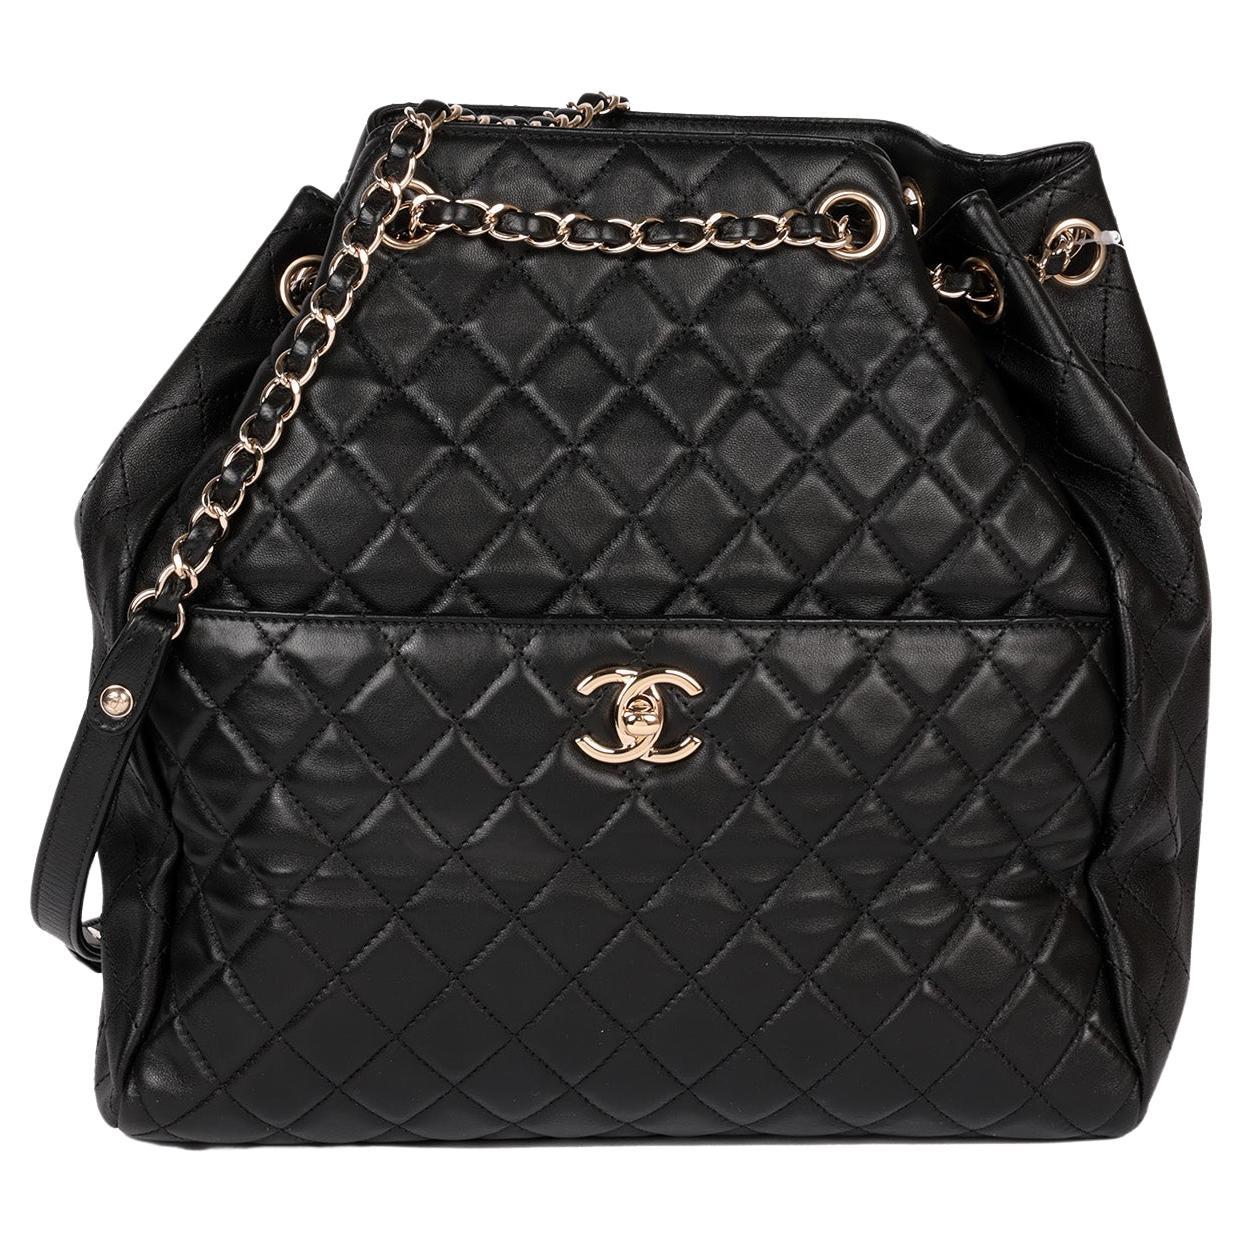 Chanel Black Quilted Lambskin Large Classic Bucket Bag For Sale